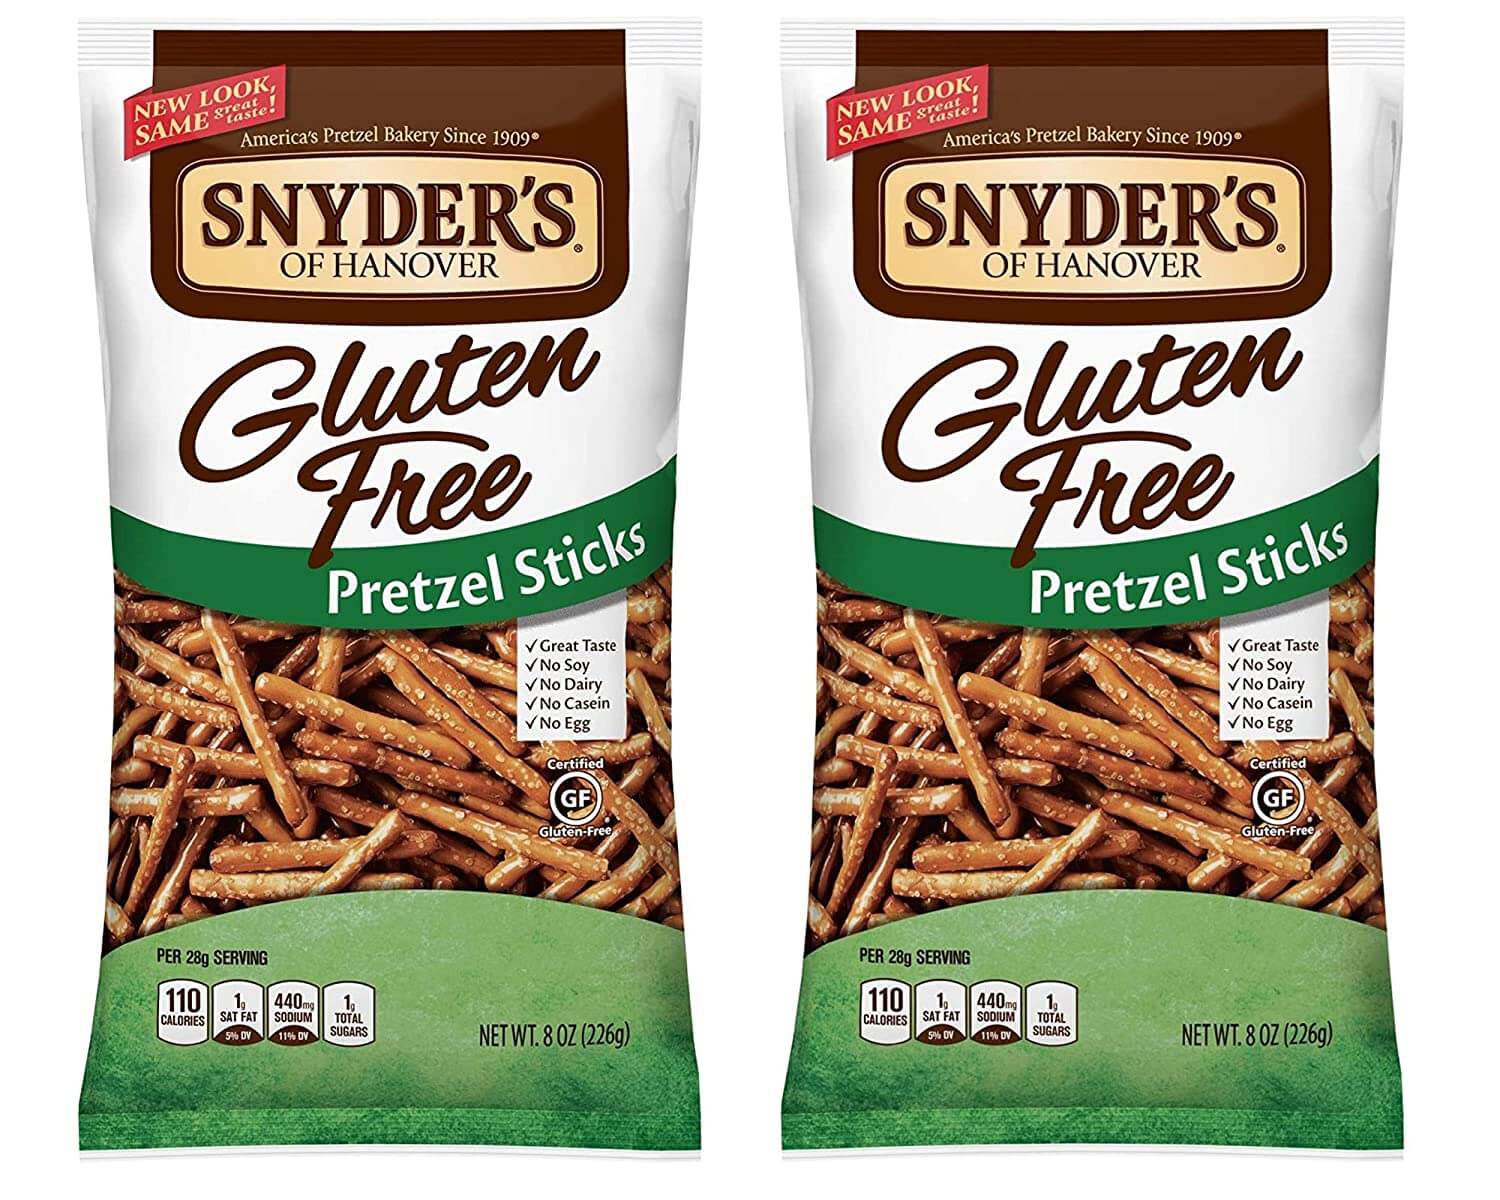 white brown and green bag of pretzels